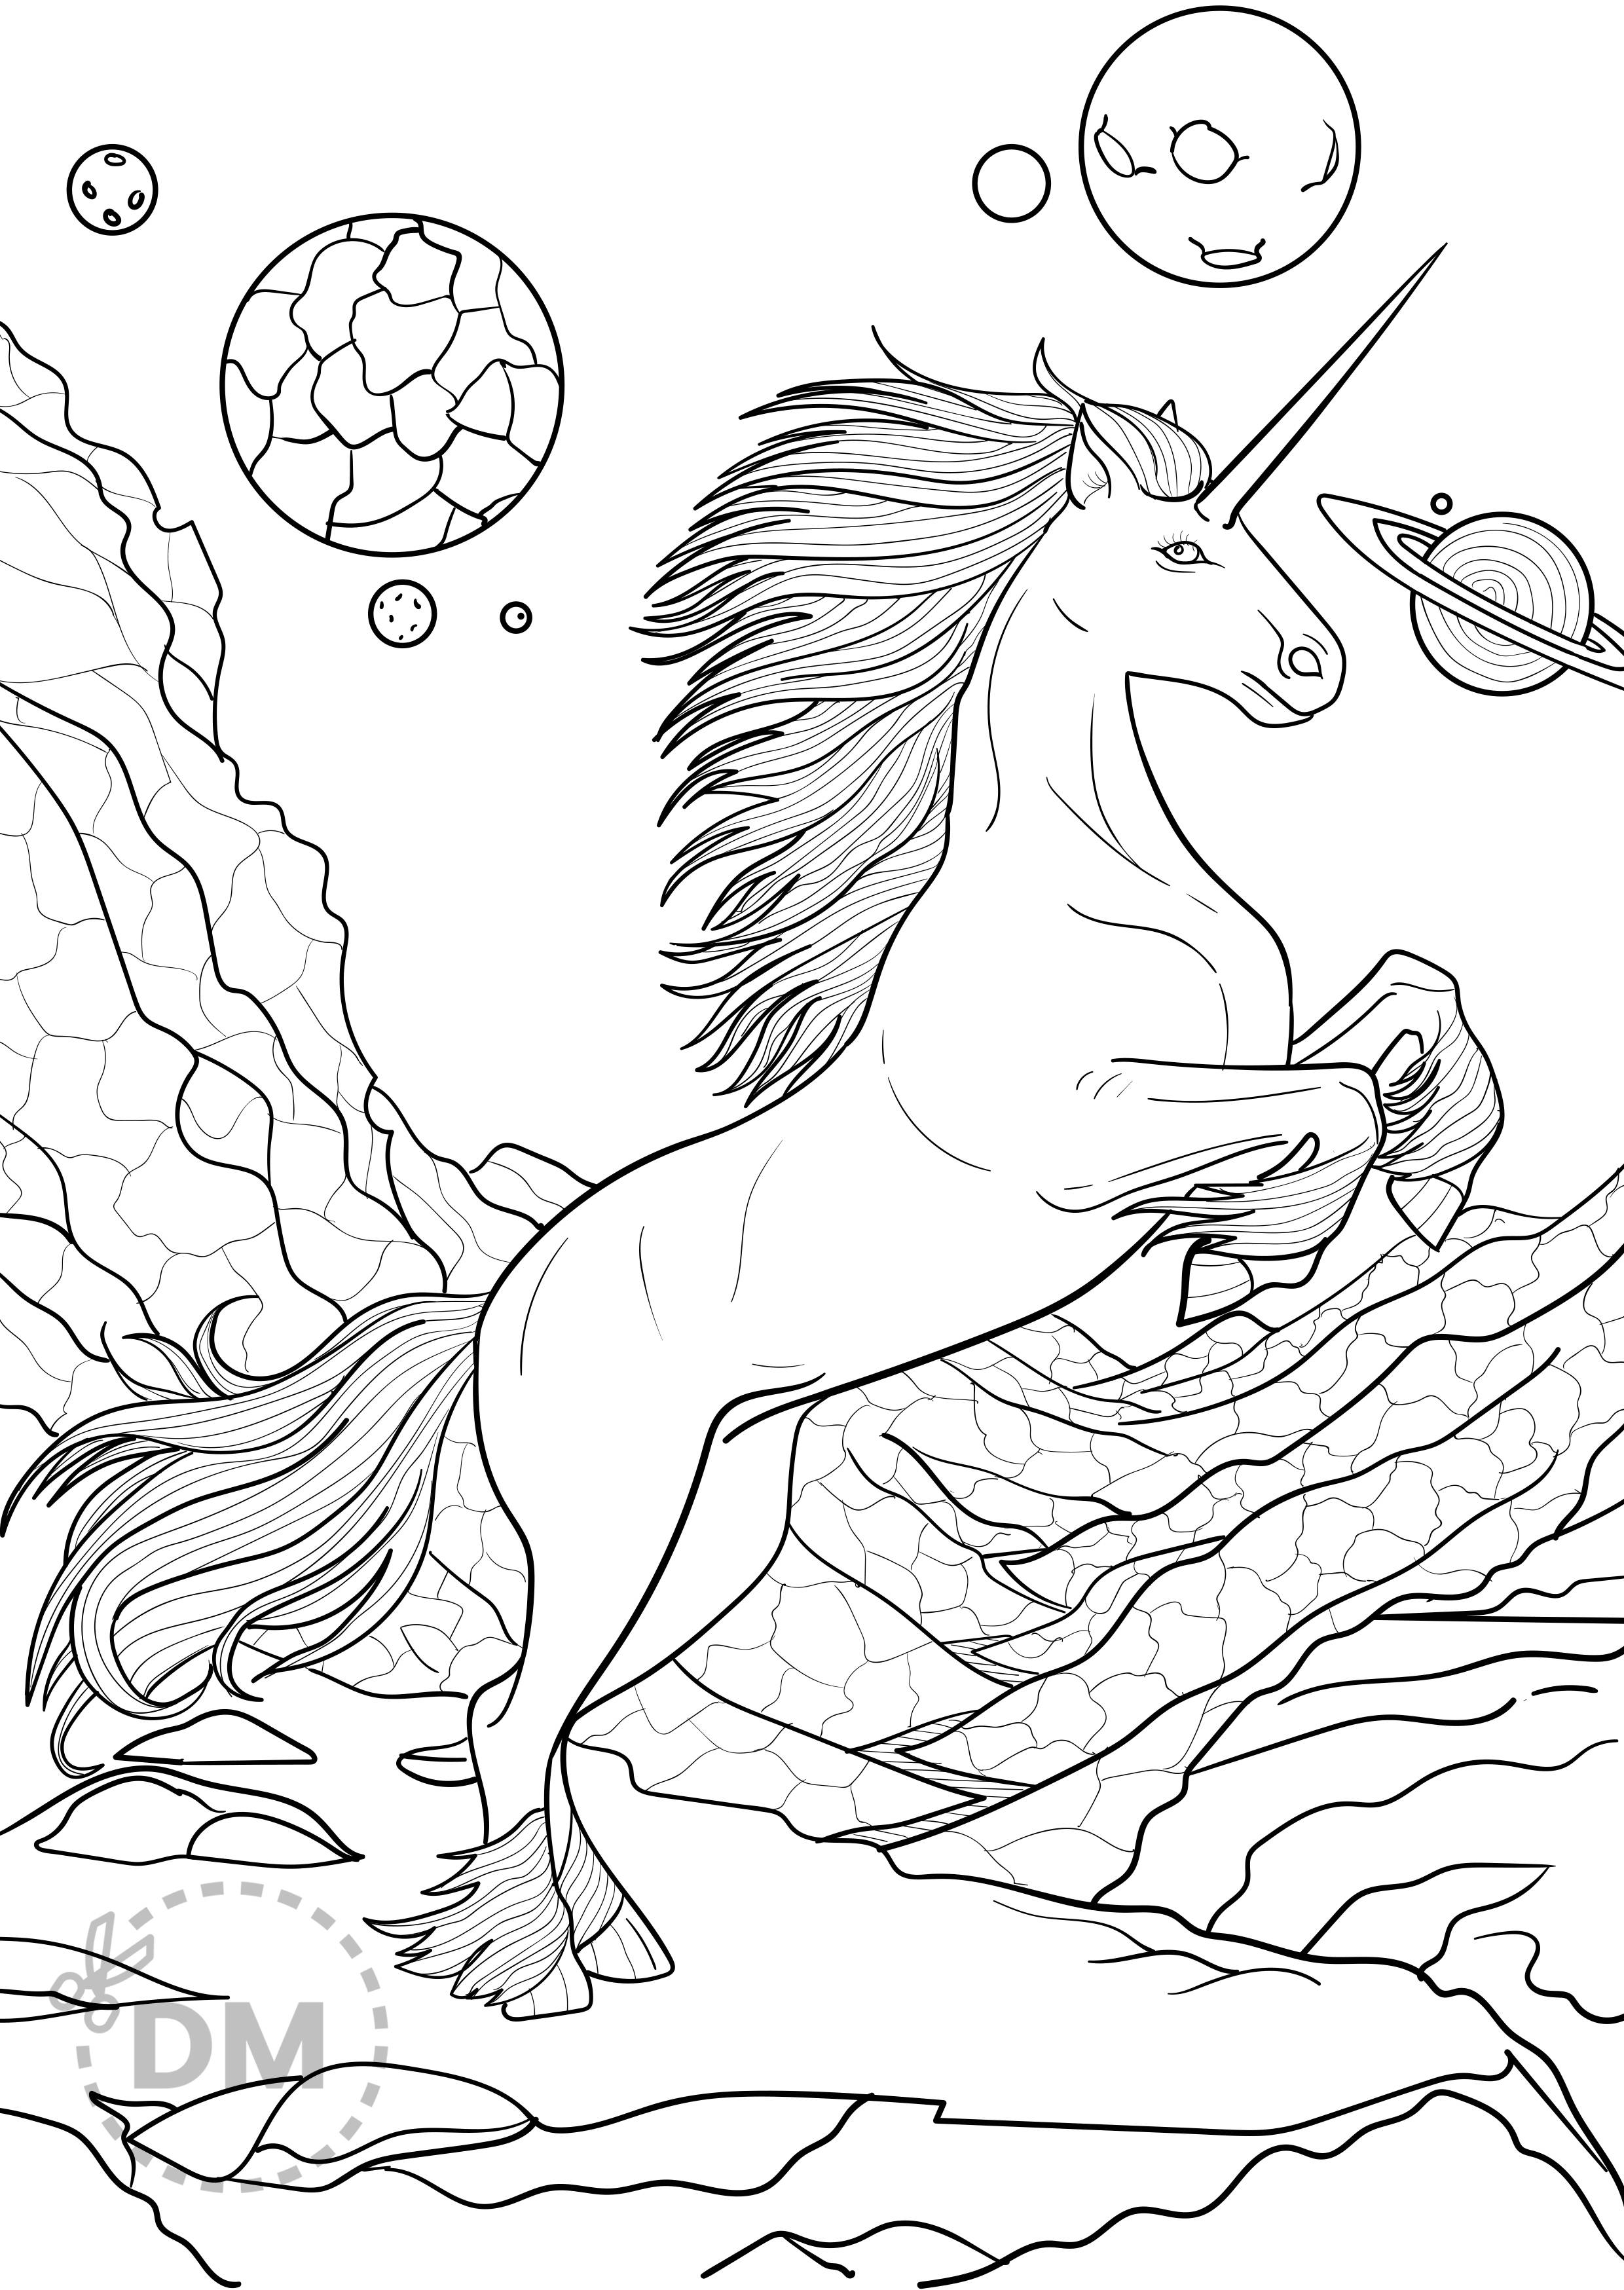 Unicorn Coloring Page for Adults | Printable Page for Download -  diy-magazine.com